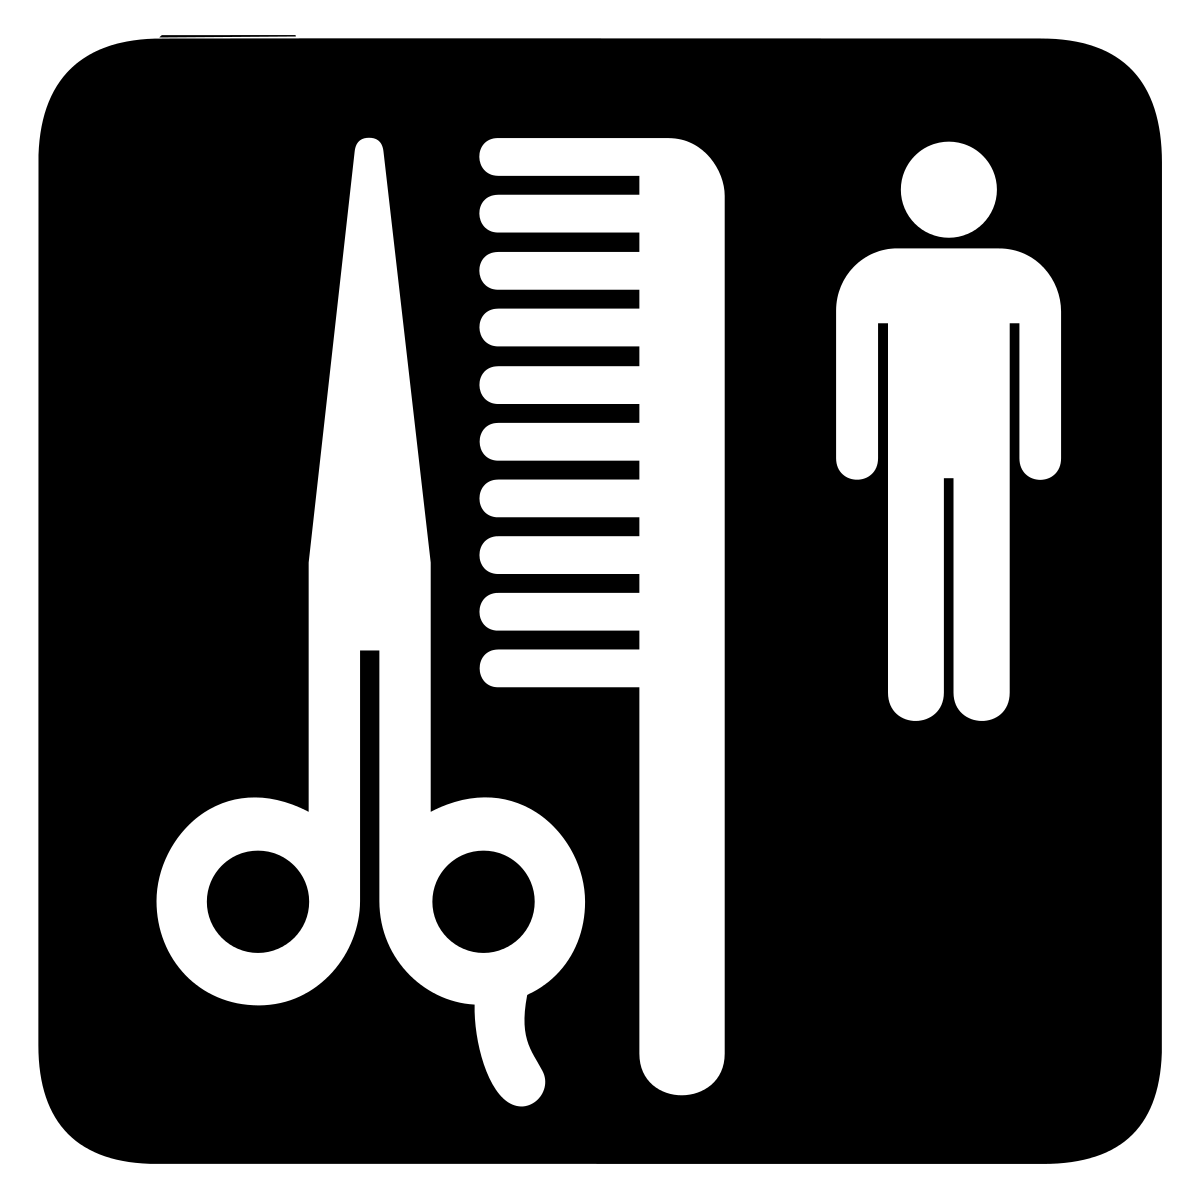 Aiga Barber Shop Bg Clipart by Anonymous : Map Cliparts #13493 ...